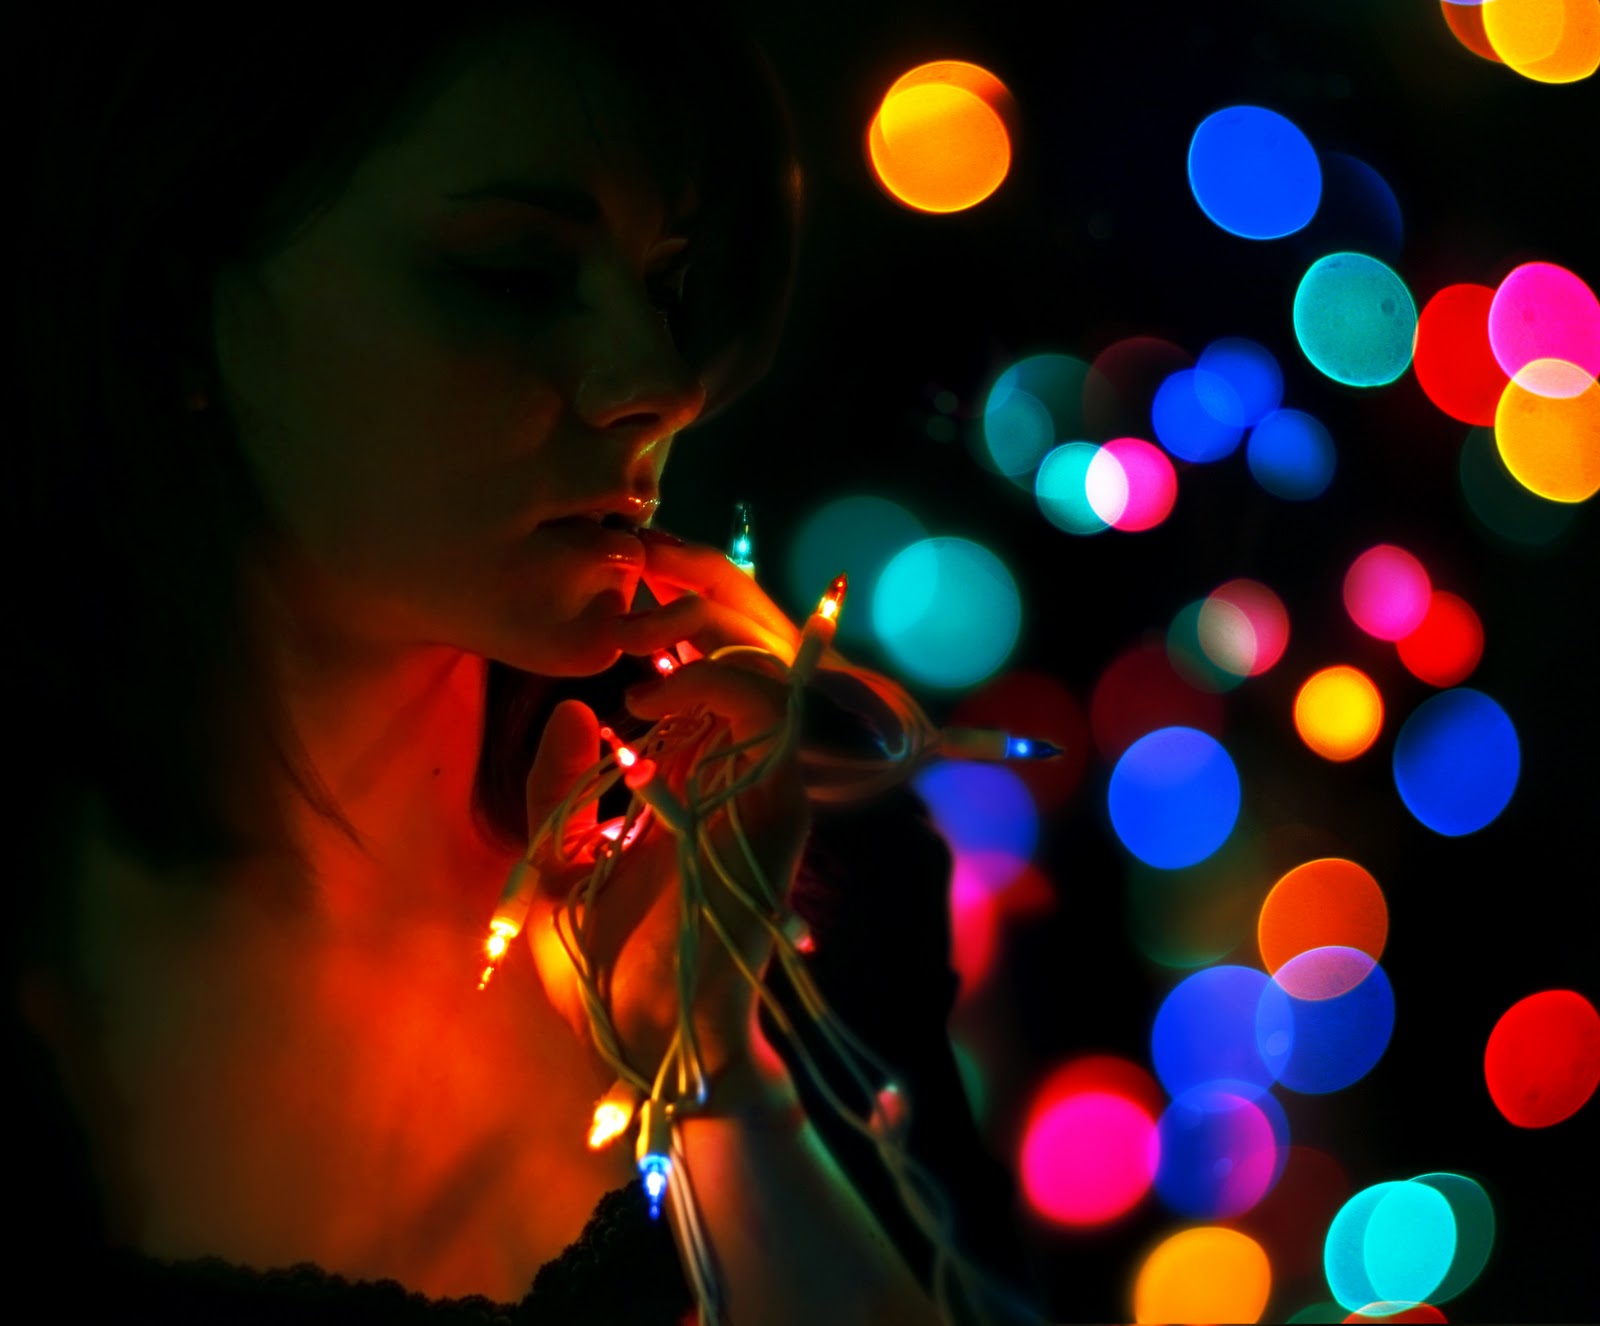 ... PHOTOS WALLPAPERS DOWNLOAD: Christmas Decorative Lights Wallpapers